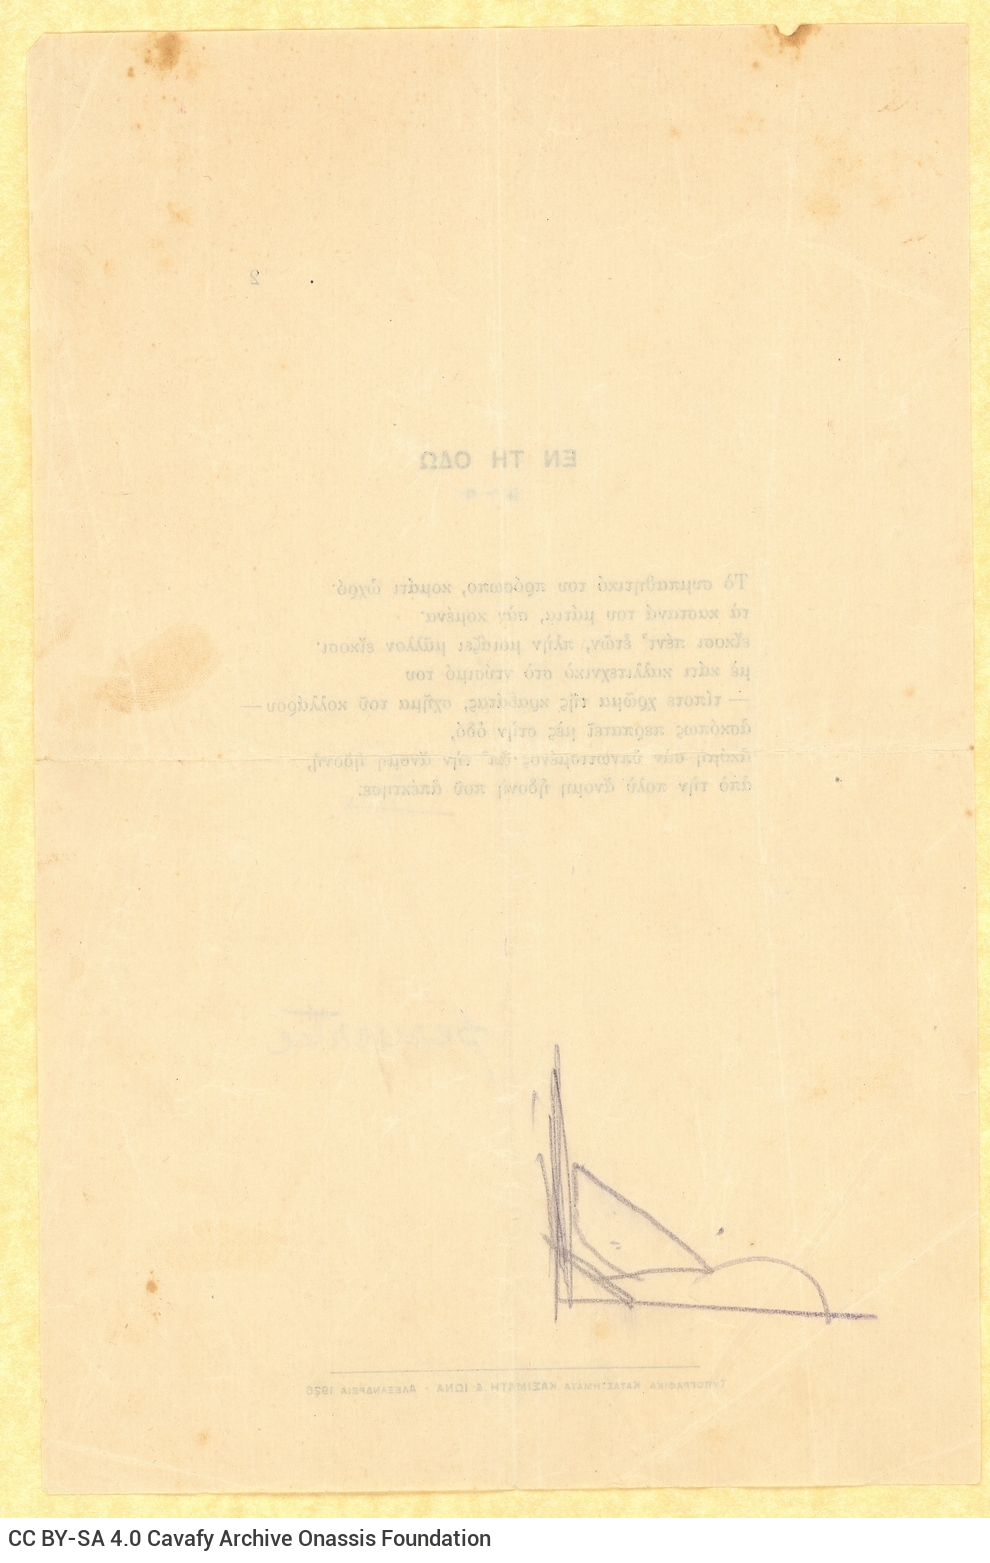 Printed broadsheet of the poem "In the Street". Handwritten note in French, in the margin; sheet number "2". Date indicati